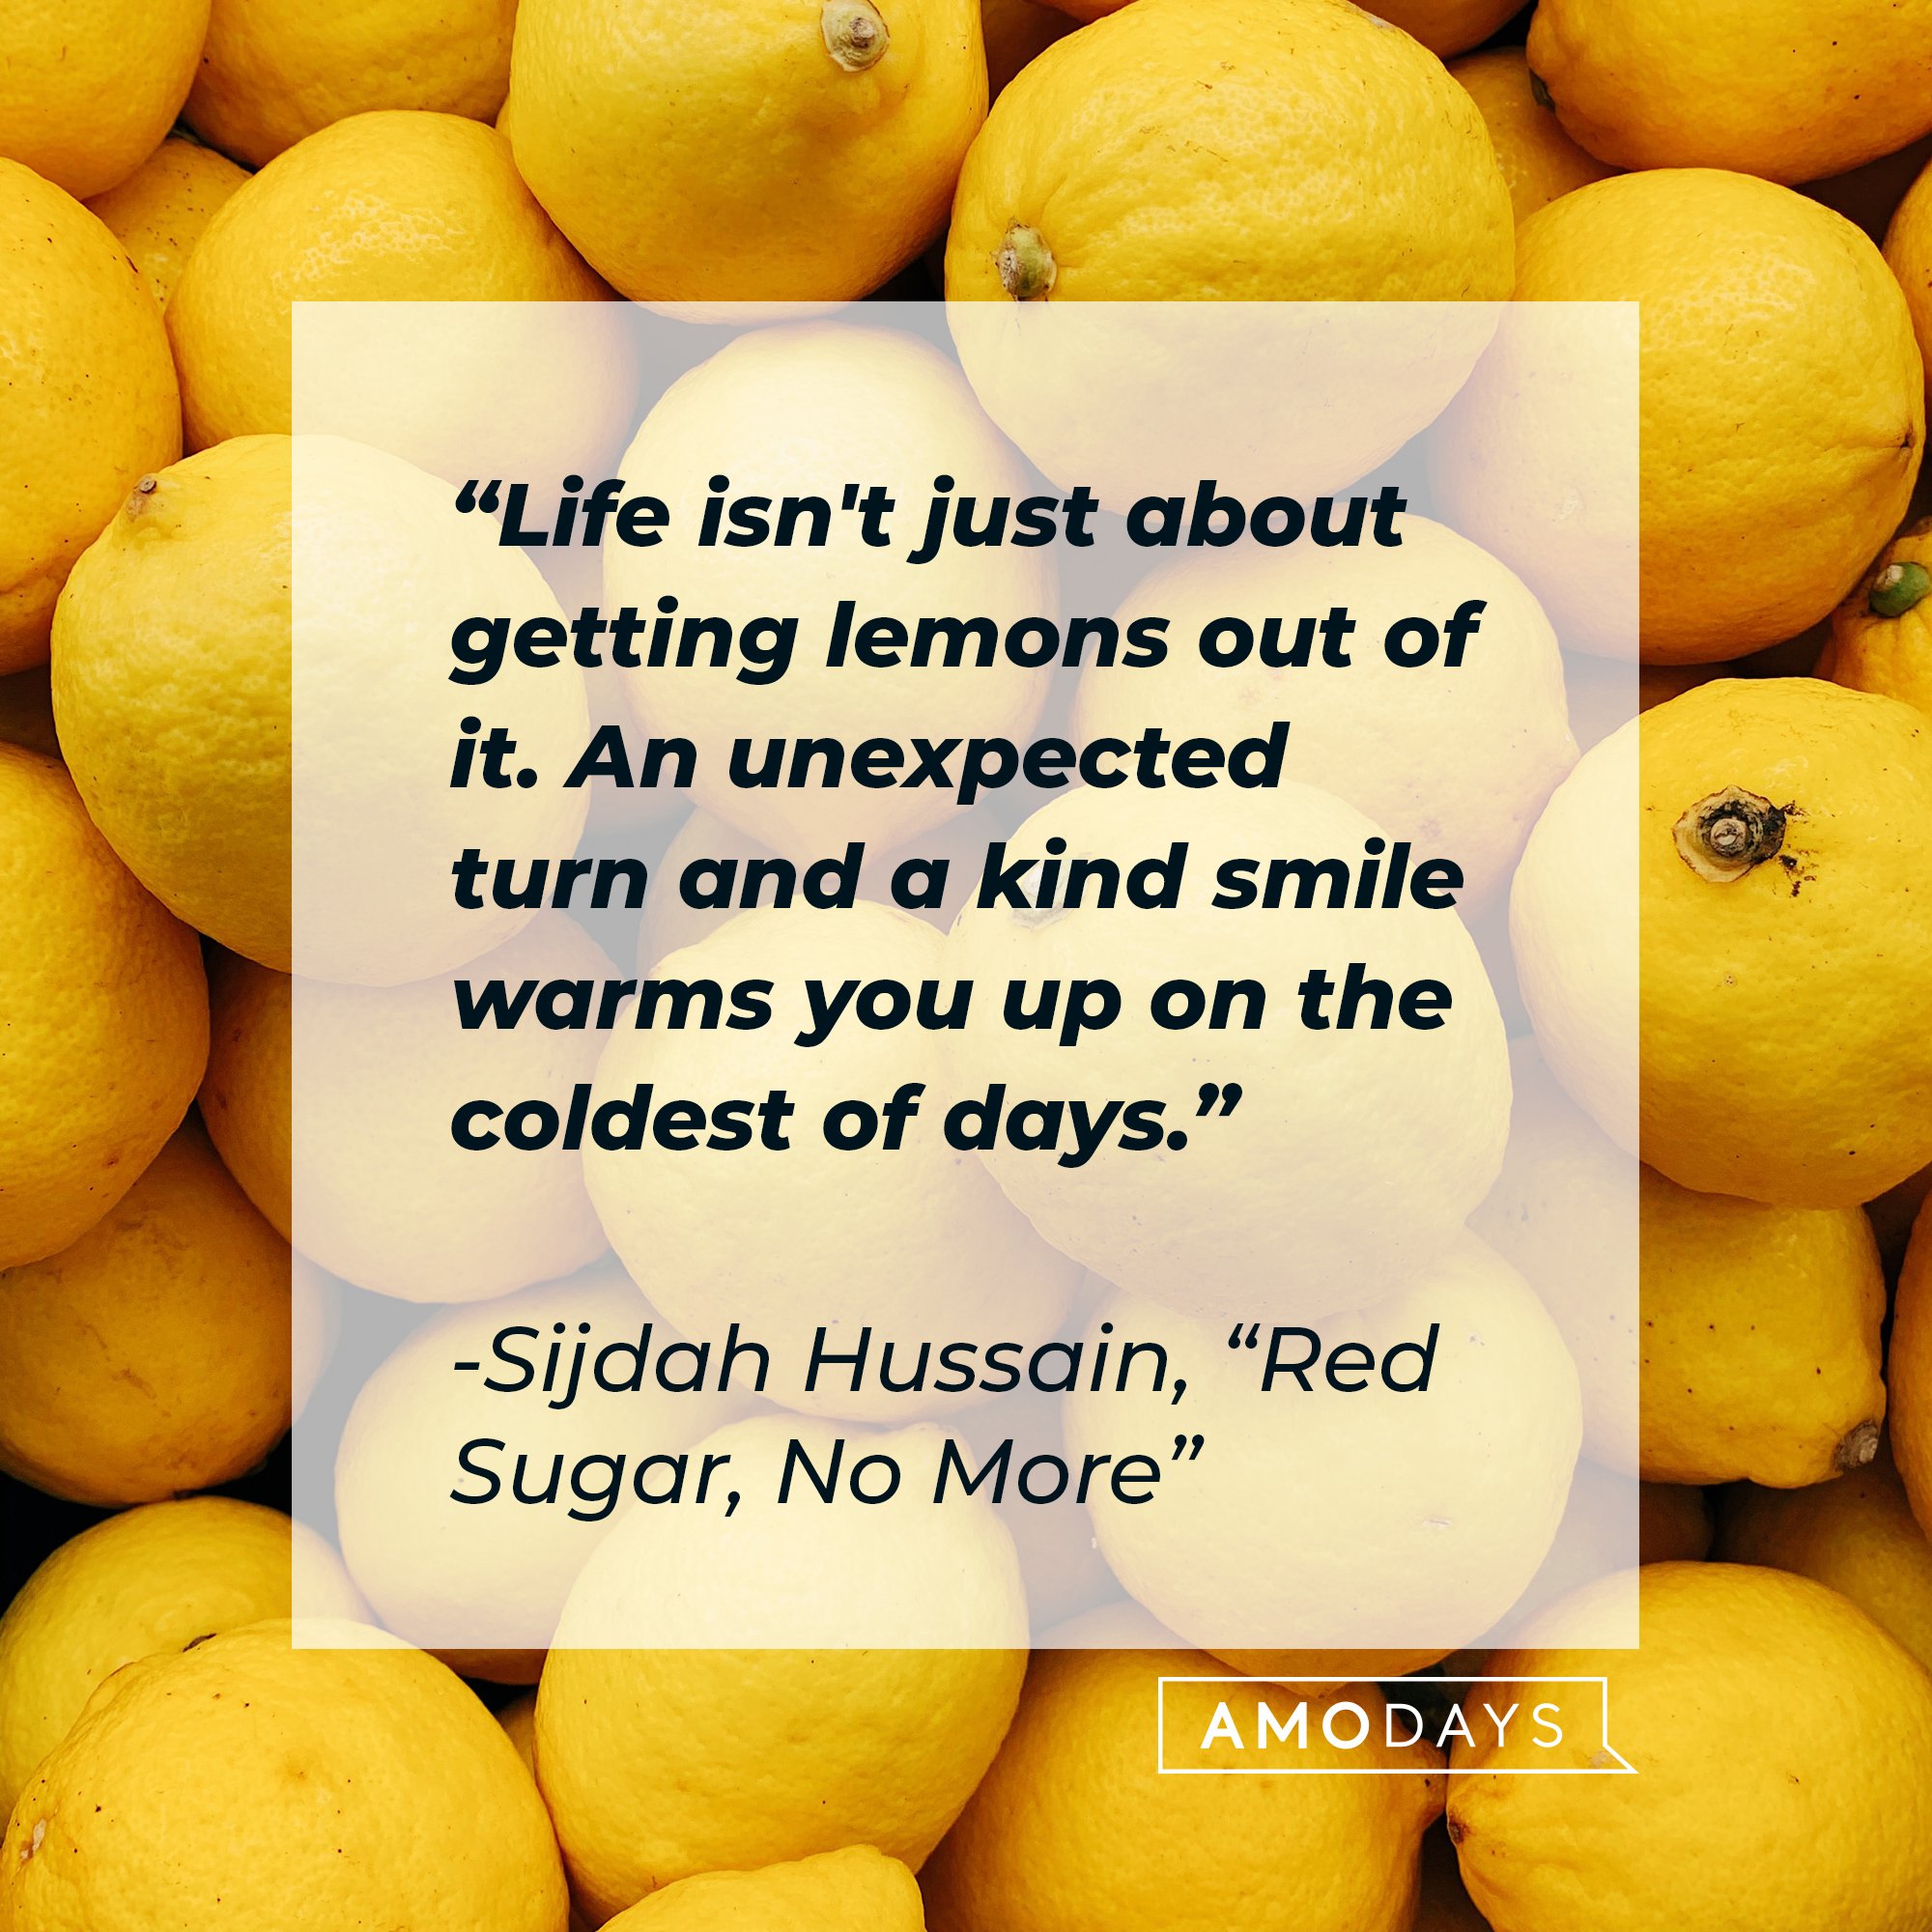 Sijdah Hussain’s quote from "Red Sugar, No More": “Life isn't just about getting lemons out of it. An unexpected turn and a kind smile warms you up on the coldest of days." | Image: AmoDays 